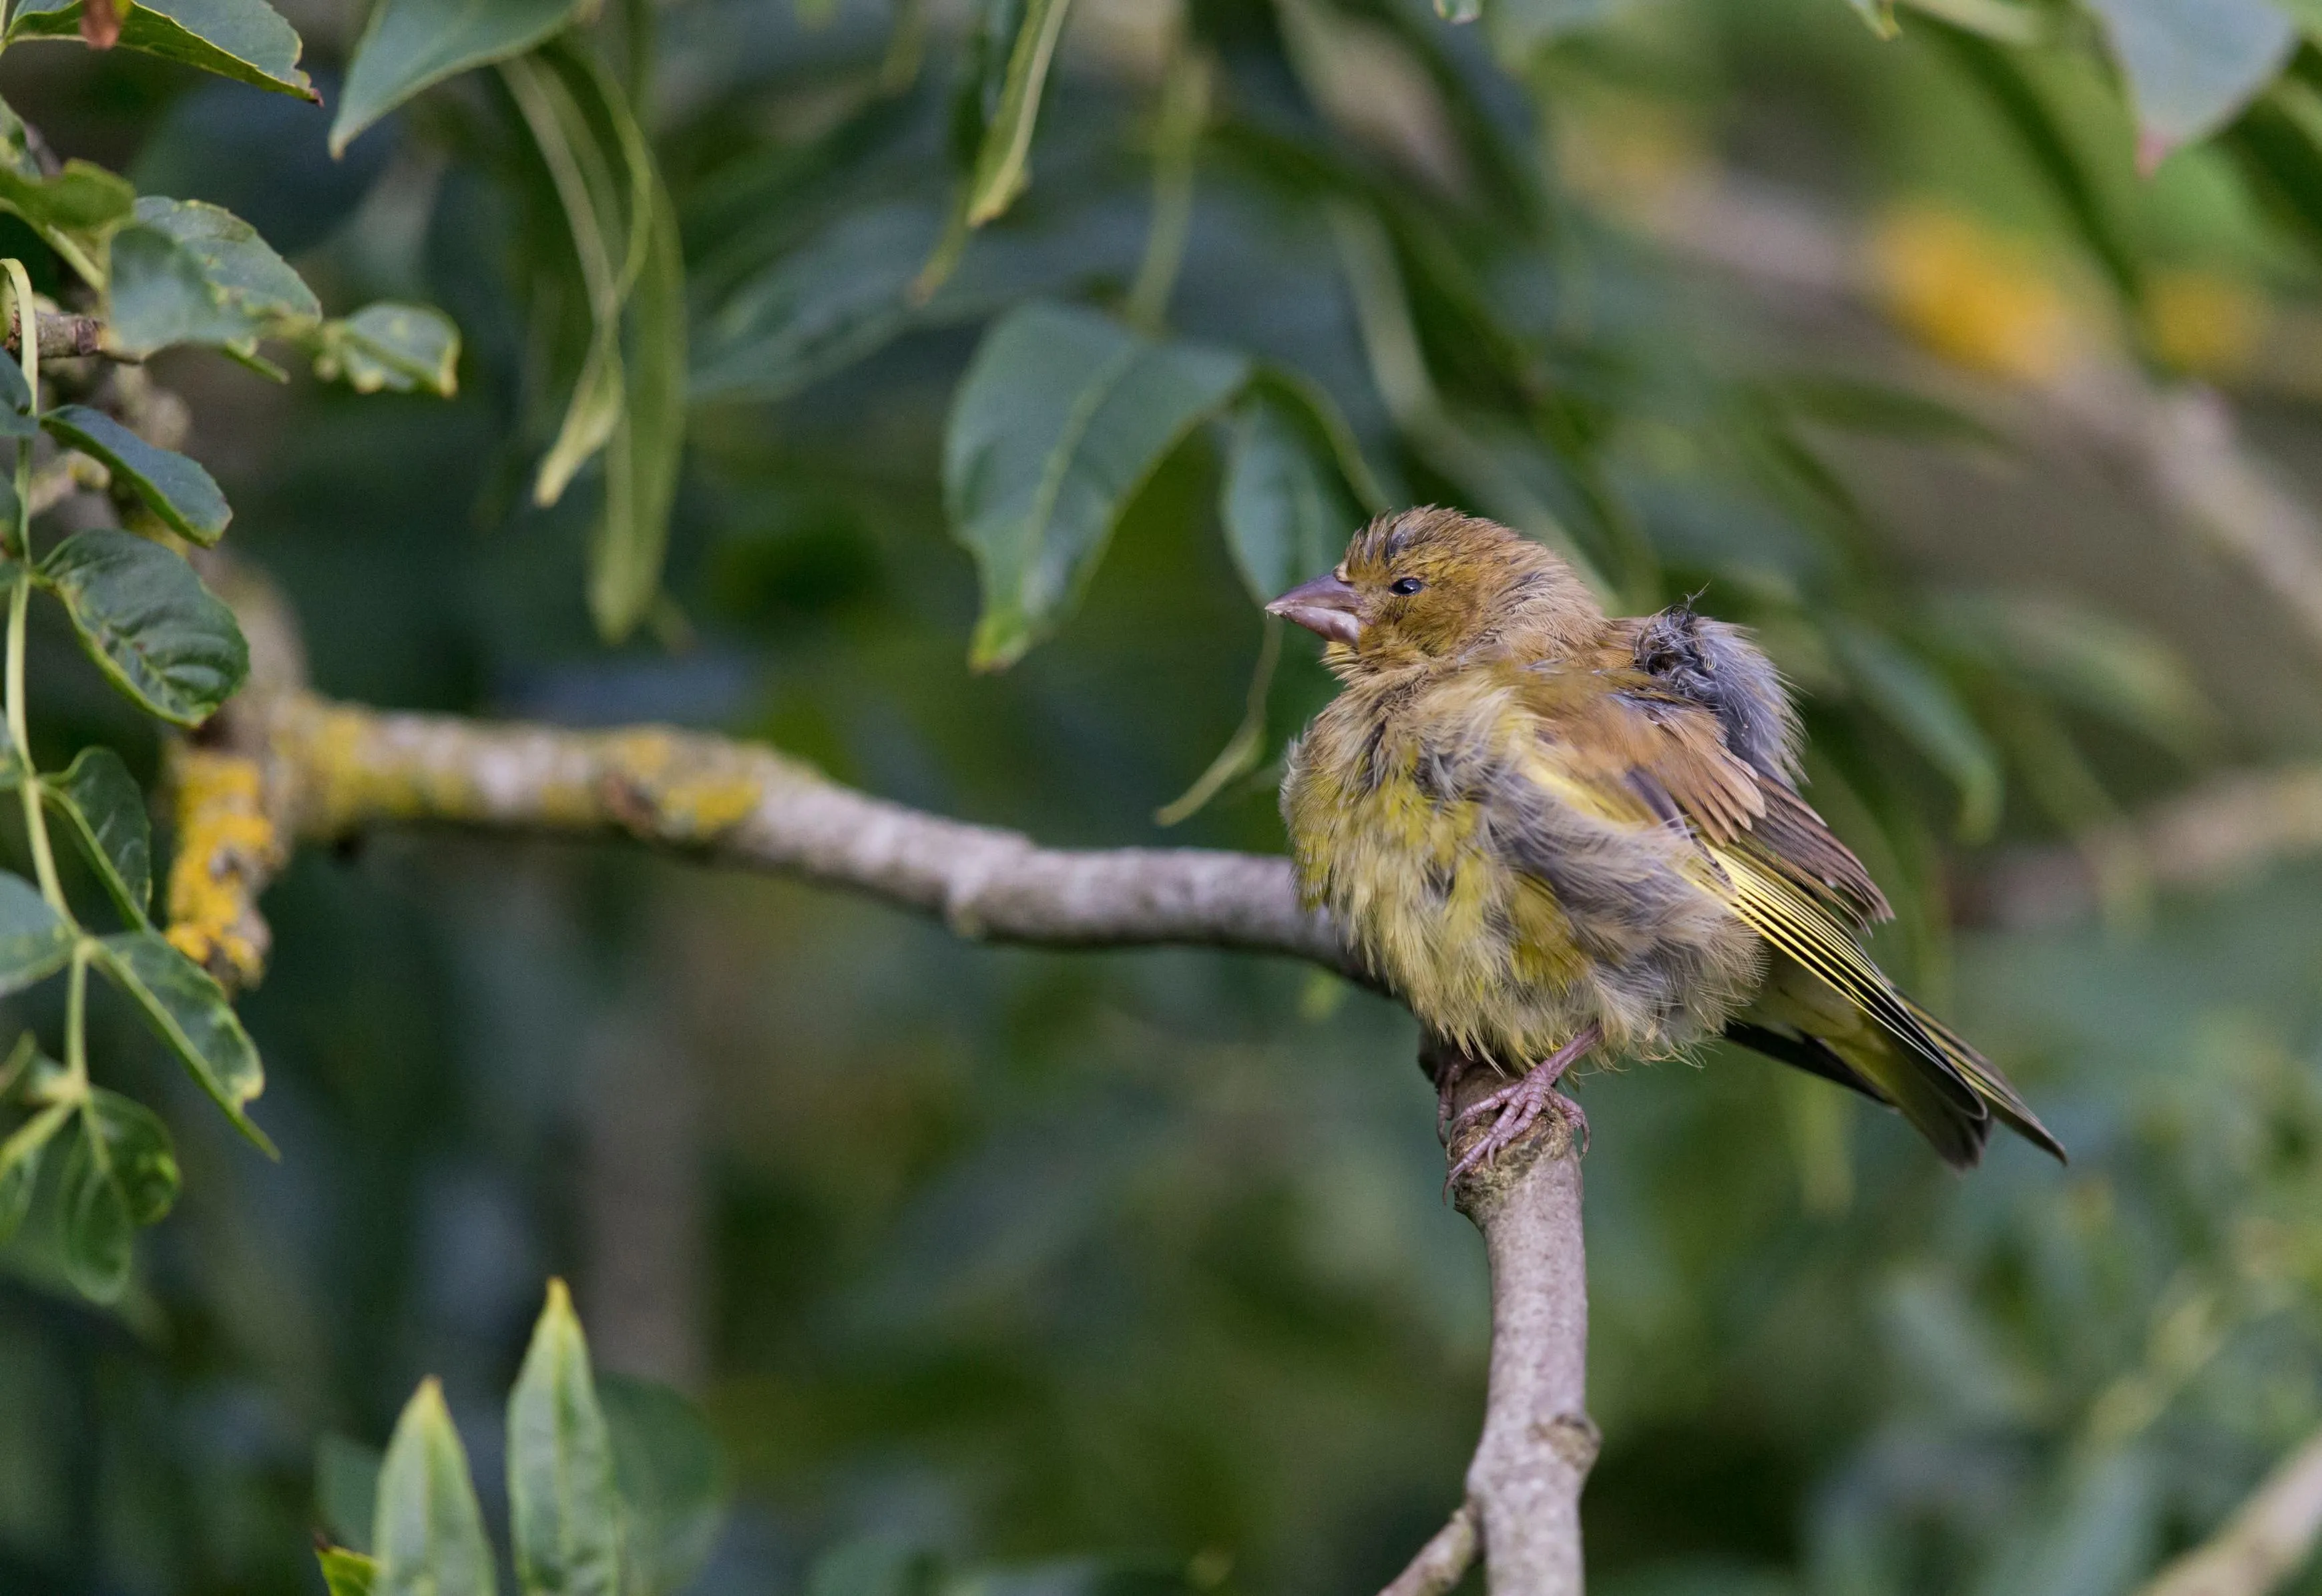 A Greenfinch perched on a tree branch with matted, wet plumage around its face and loose feathers on its body.